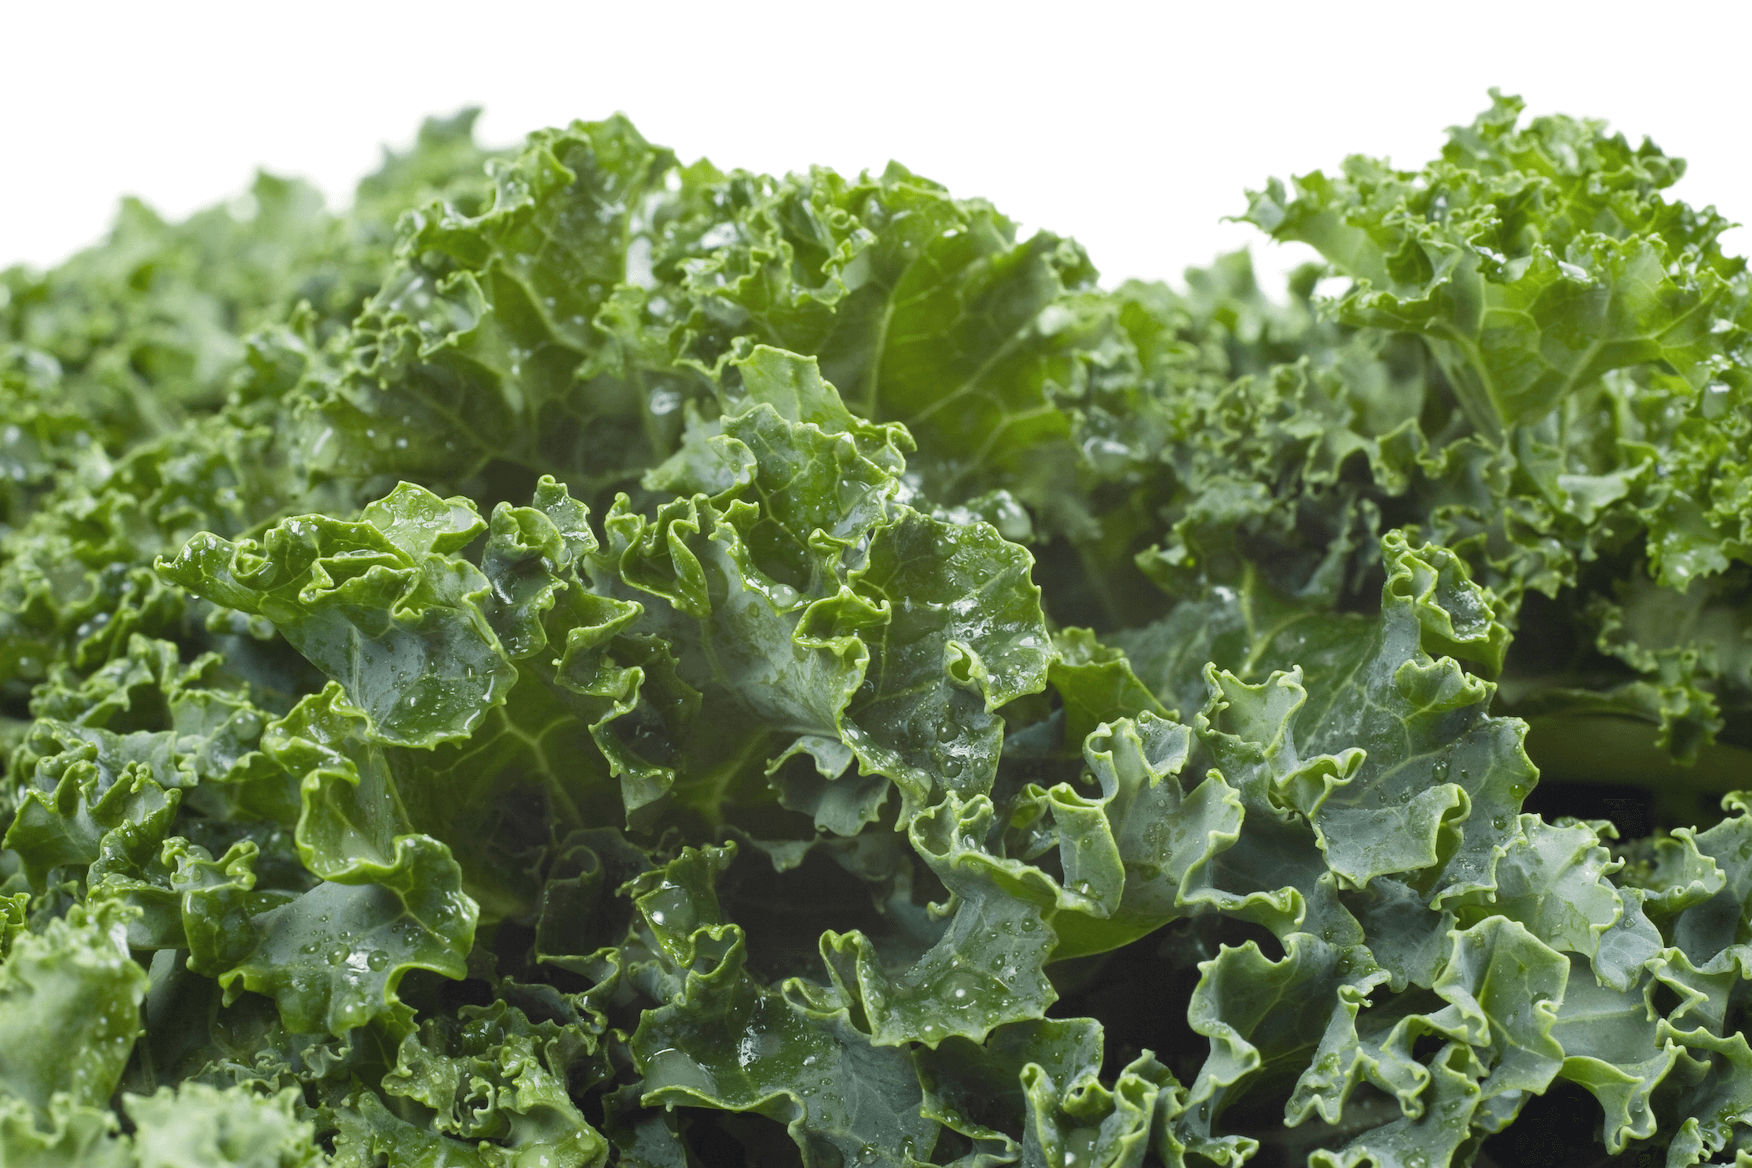 What’s So Great About Kale?